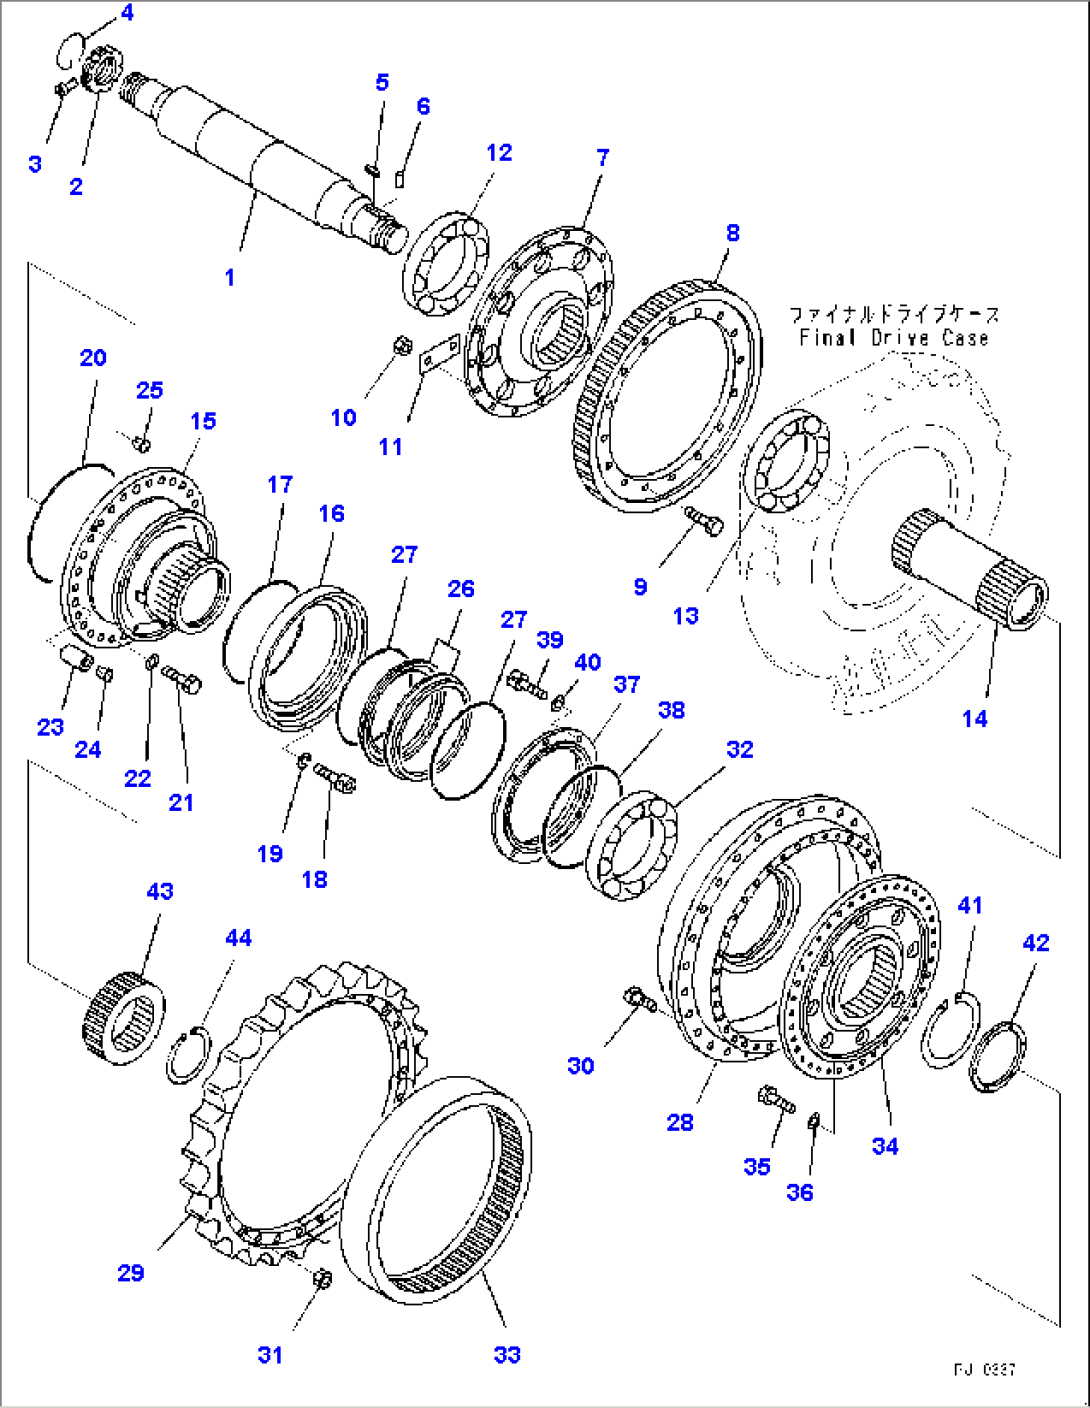 Final Drive, Shaft and Gear (#15479-)